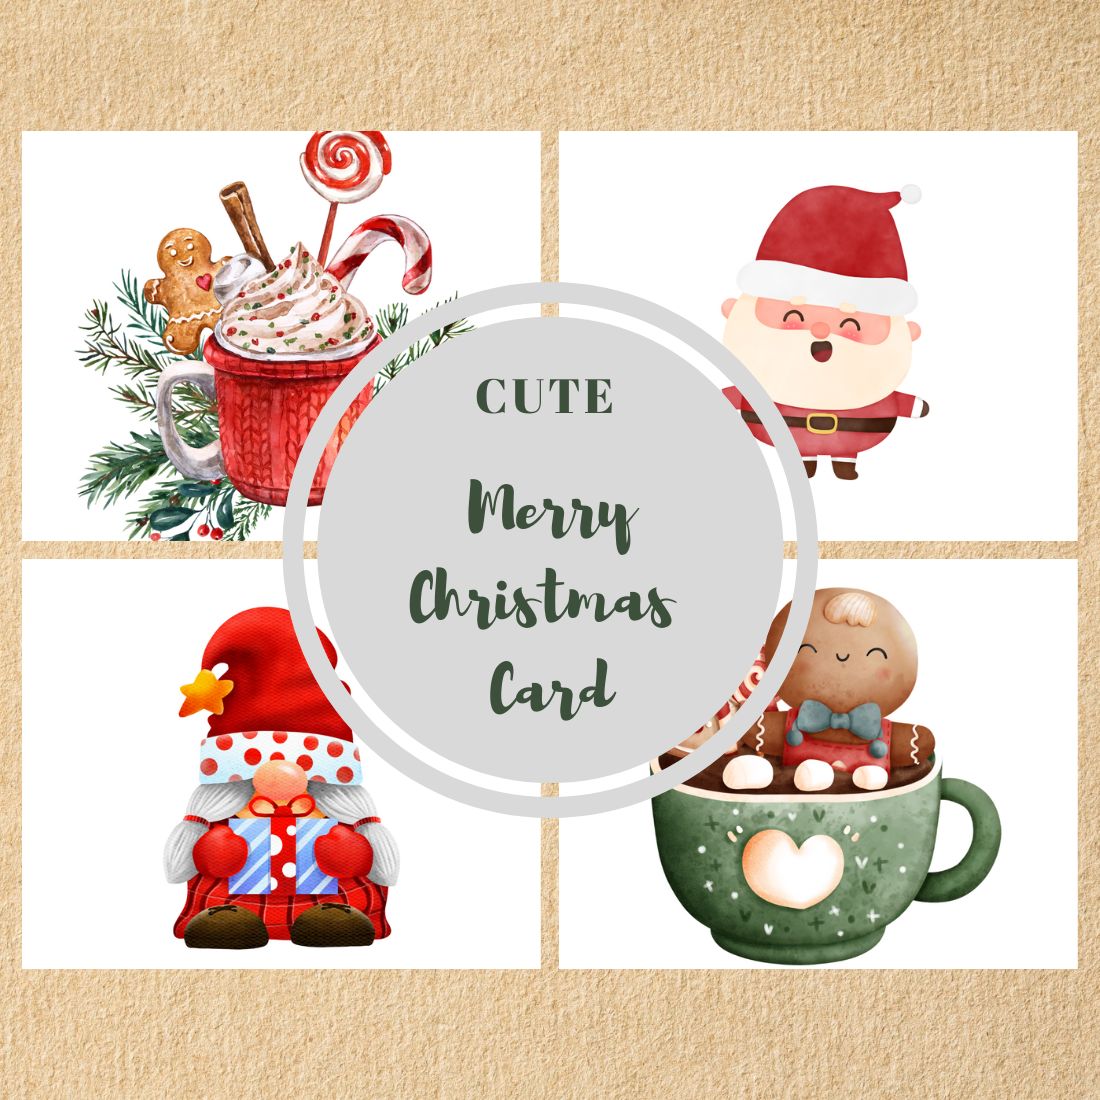 Cute Christmas Elements Cards Design cover image.